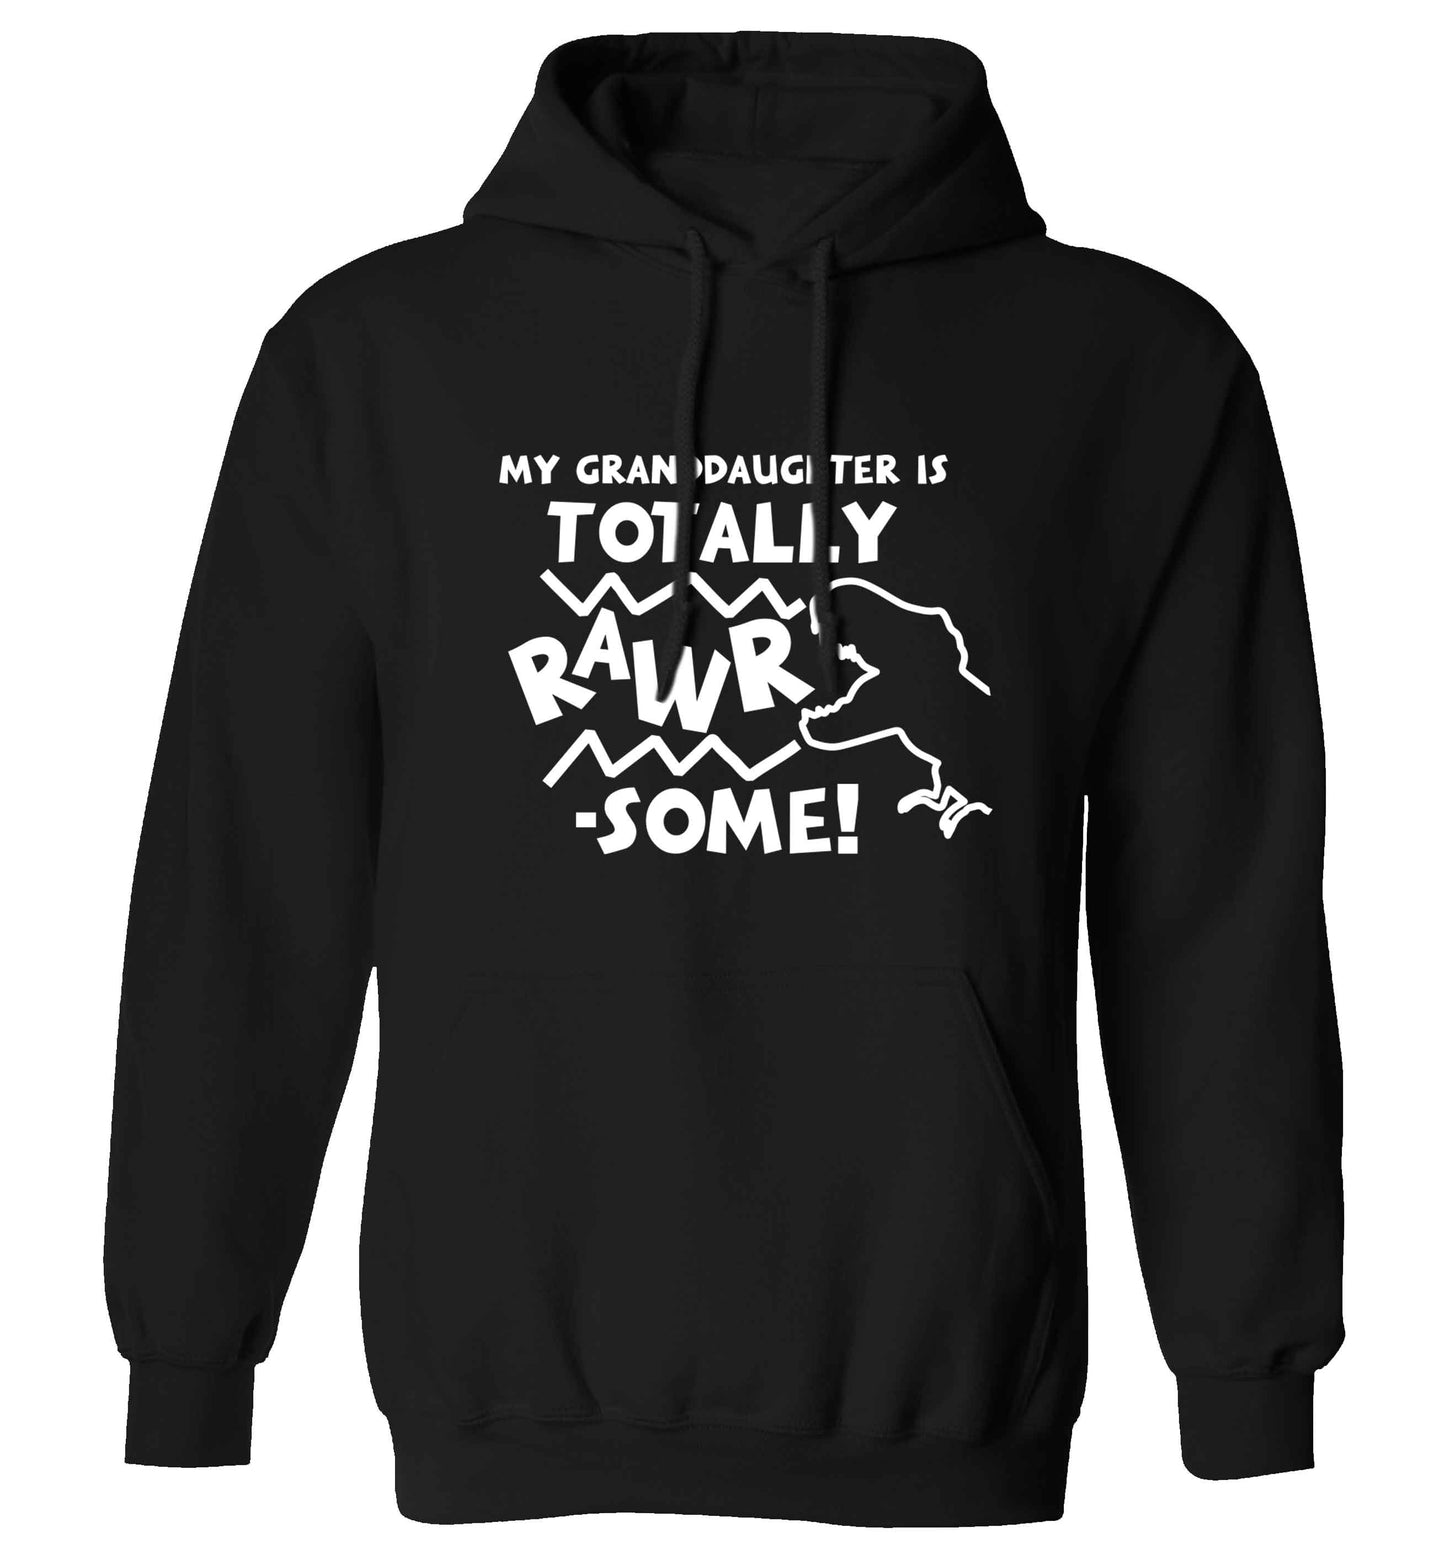 My granddaughter is totally rawrsome adults unisex black hoodie 2XL